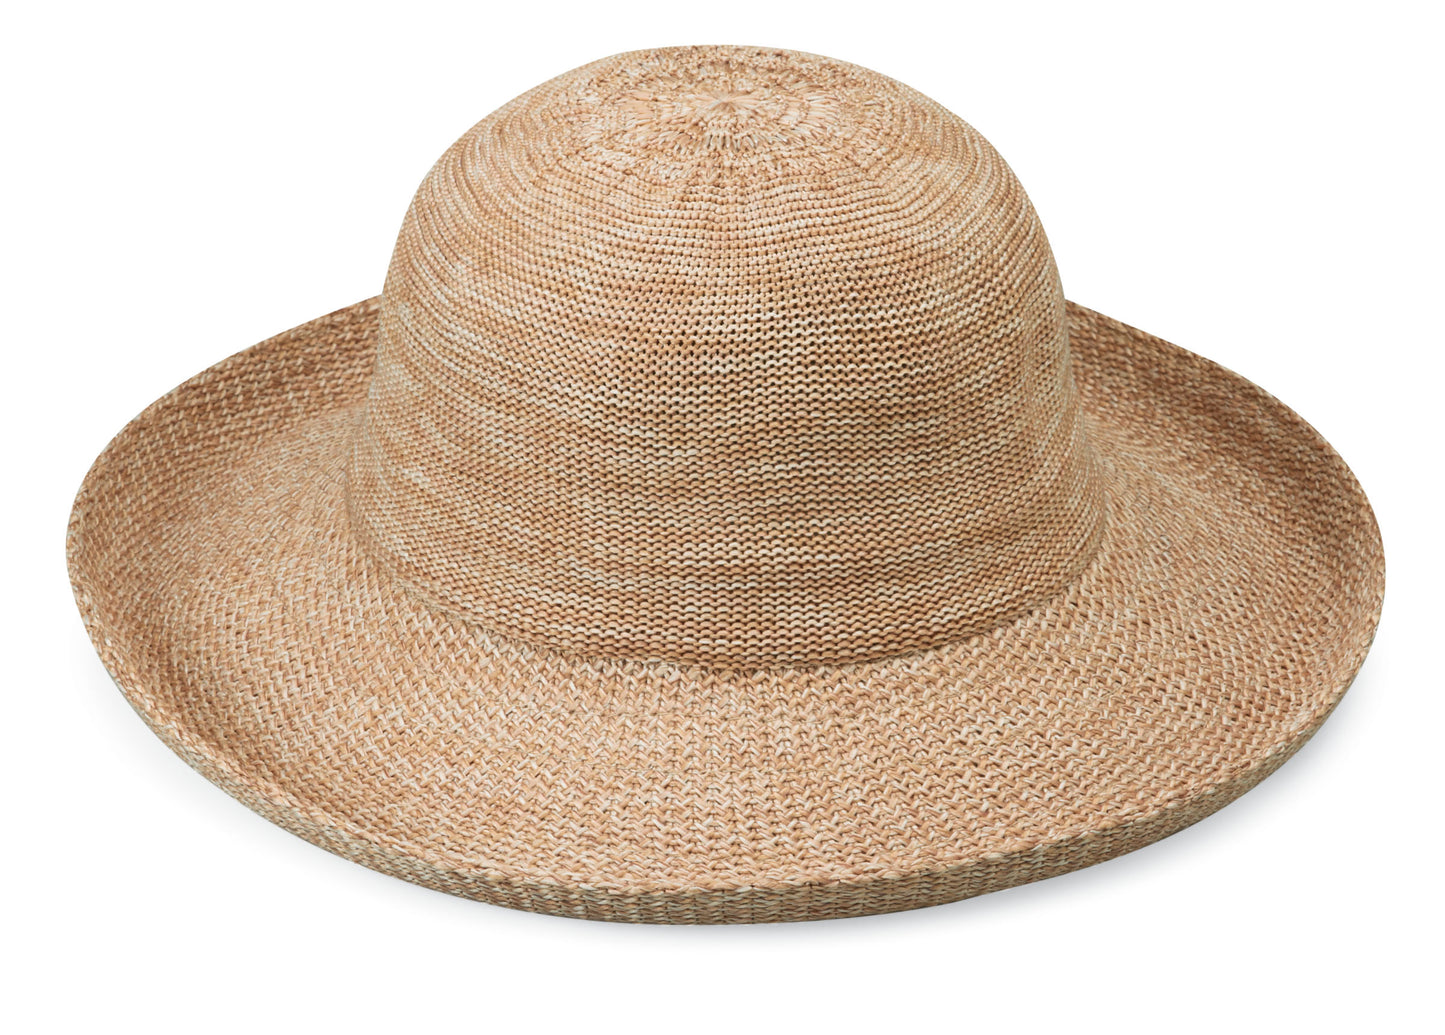 This packable brown beach hat not only offers UPF 50+ sun protection but is also recommended by the Skin Cancer Foundation. Its wide brim ensures stylish sun coverage, making it a travel-friendly and fashionable addition to your personal fashion collection.